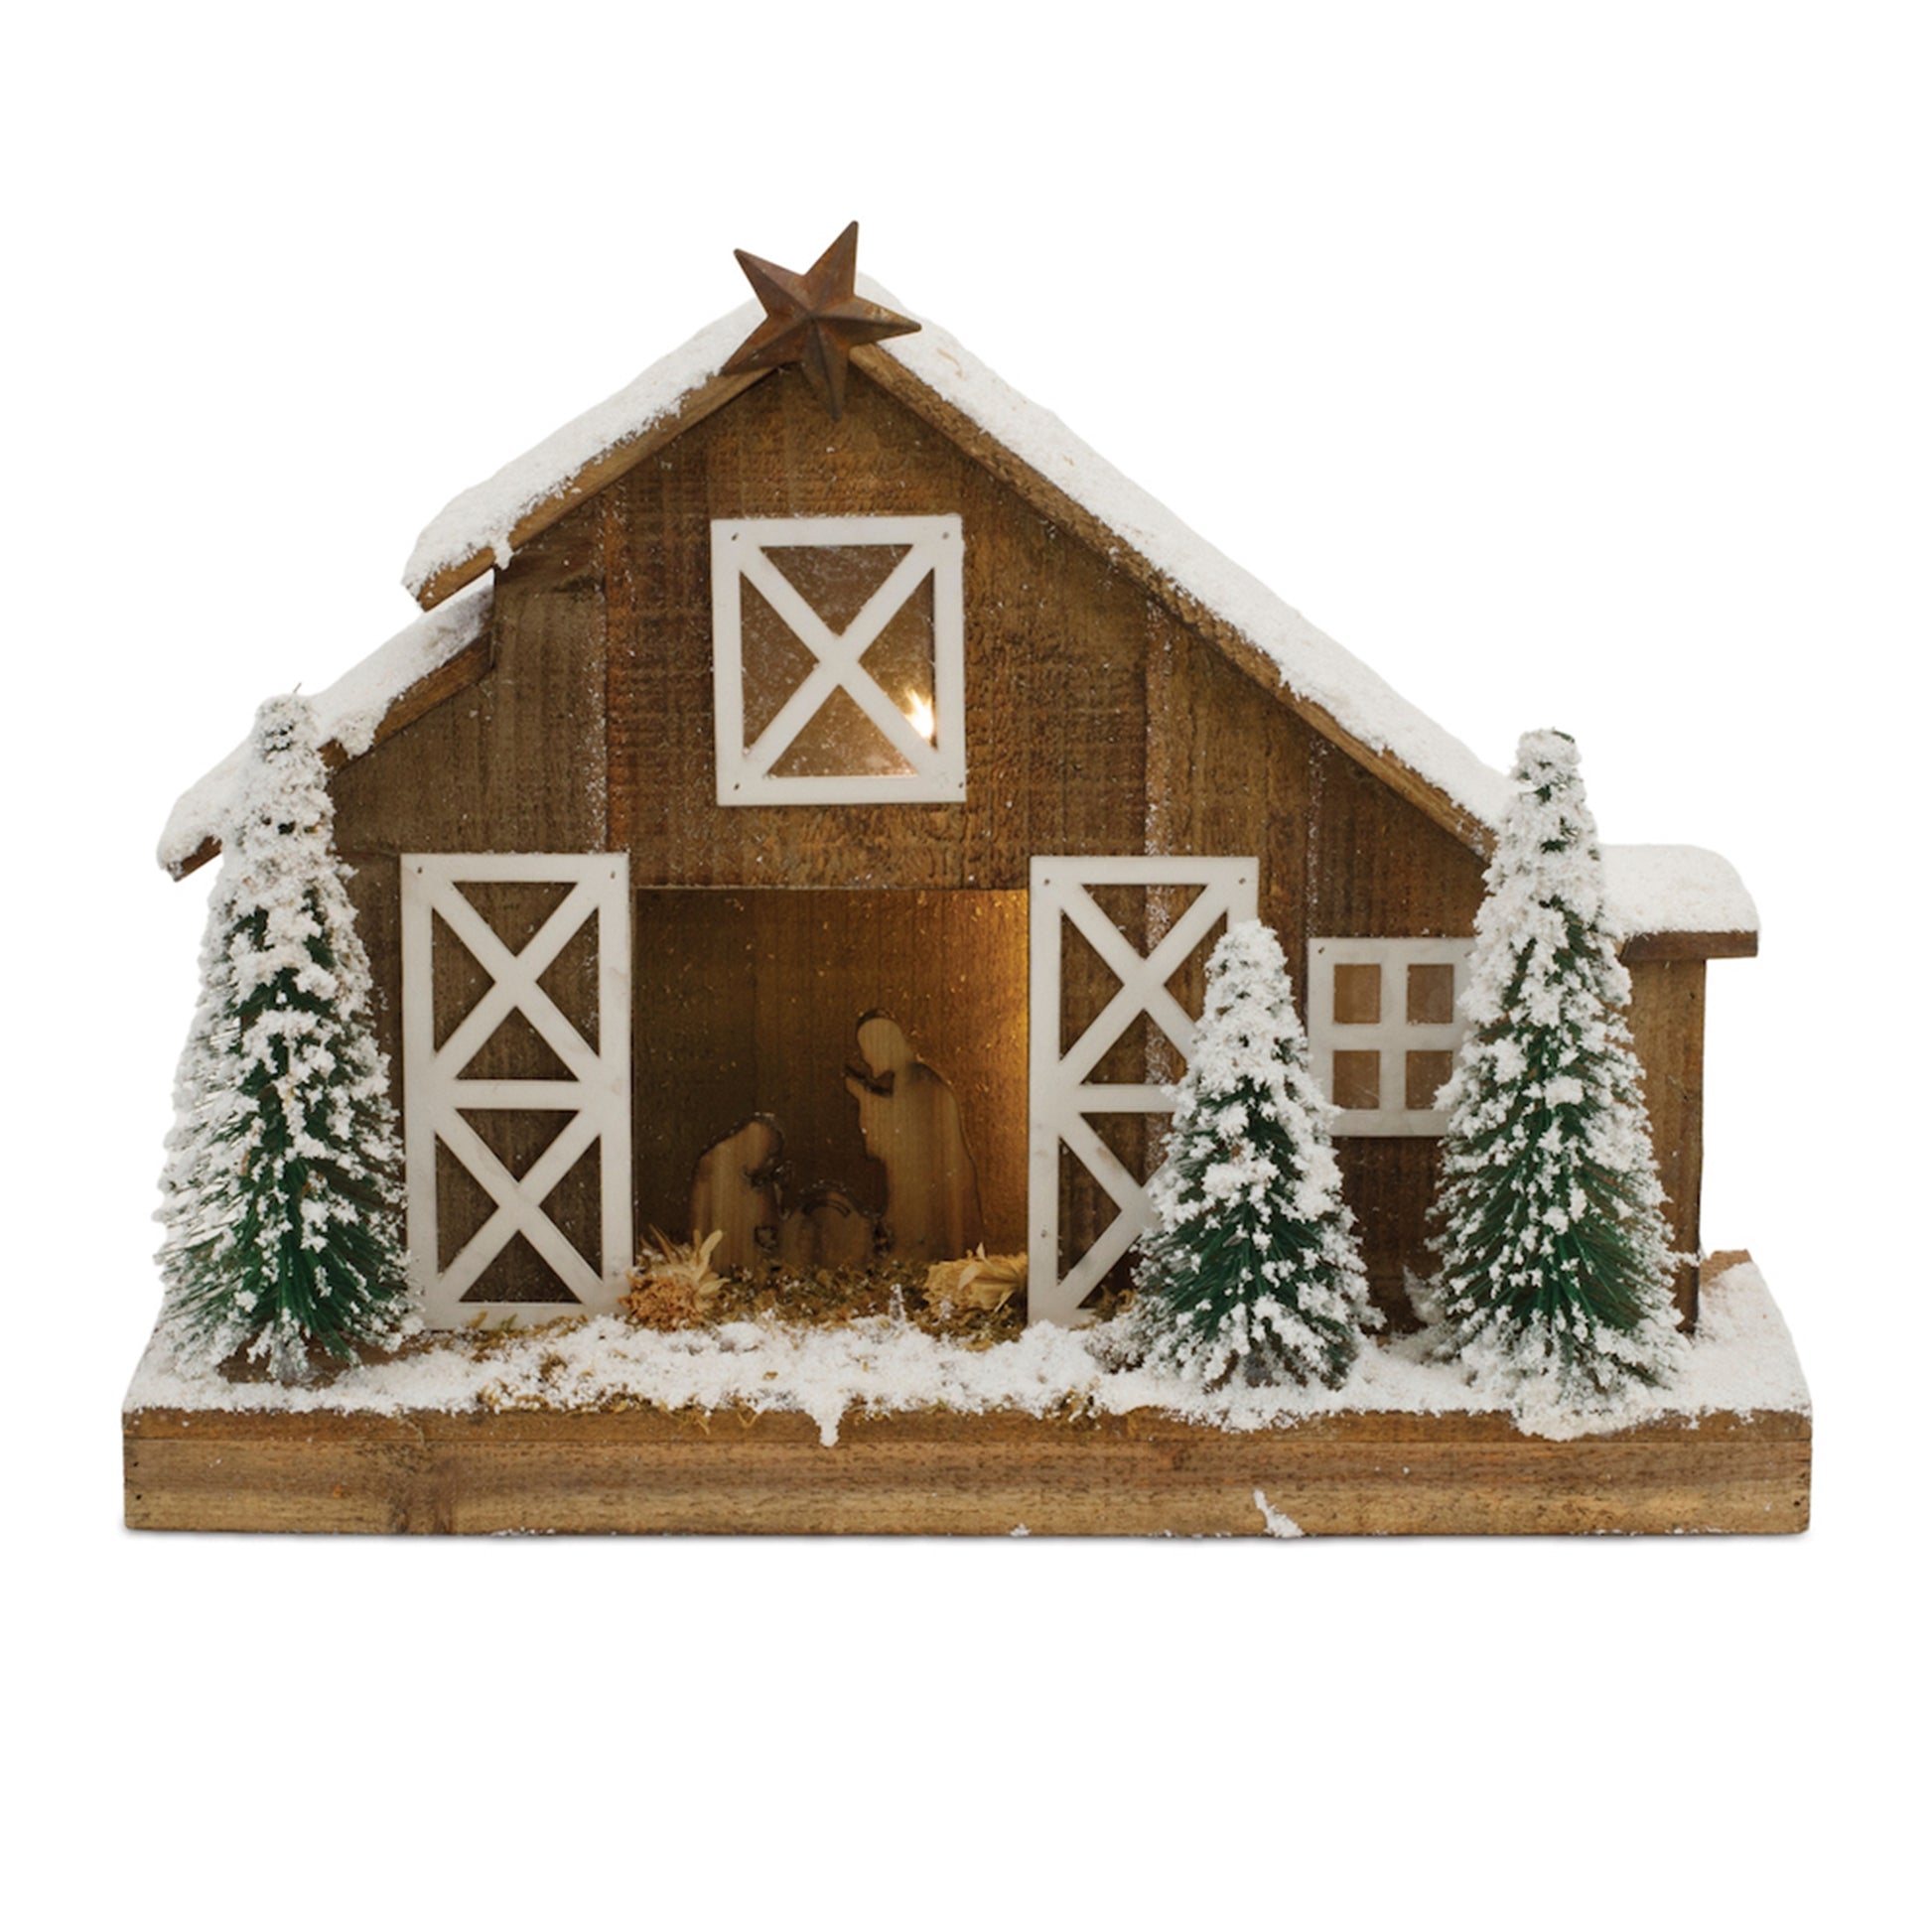 wooden stable lighted with the holy family inside and trees on the outside and a star at the peak displayed against a white background